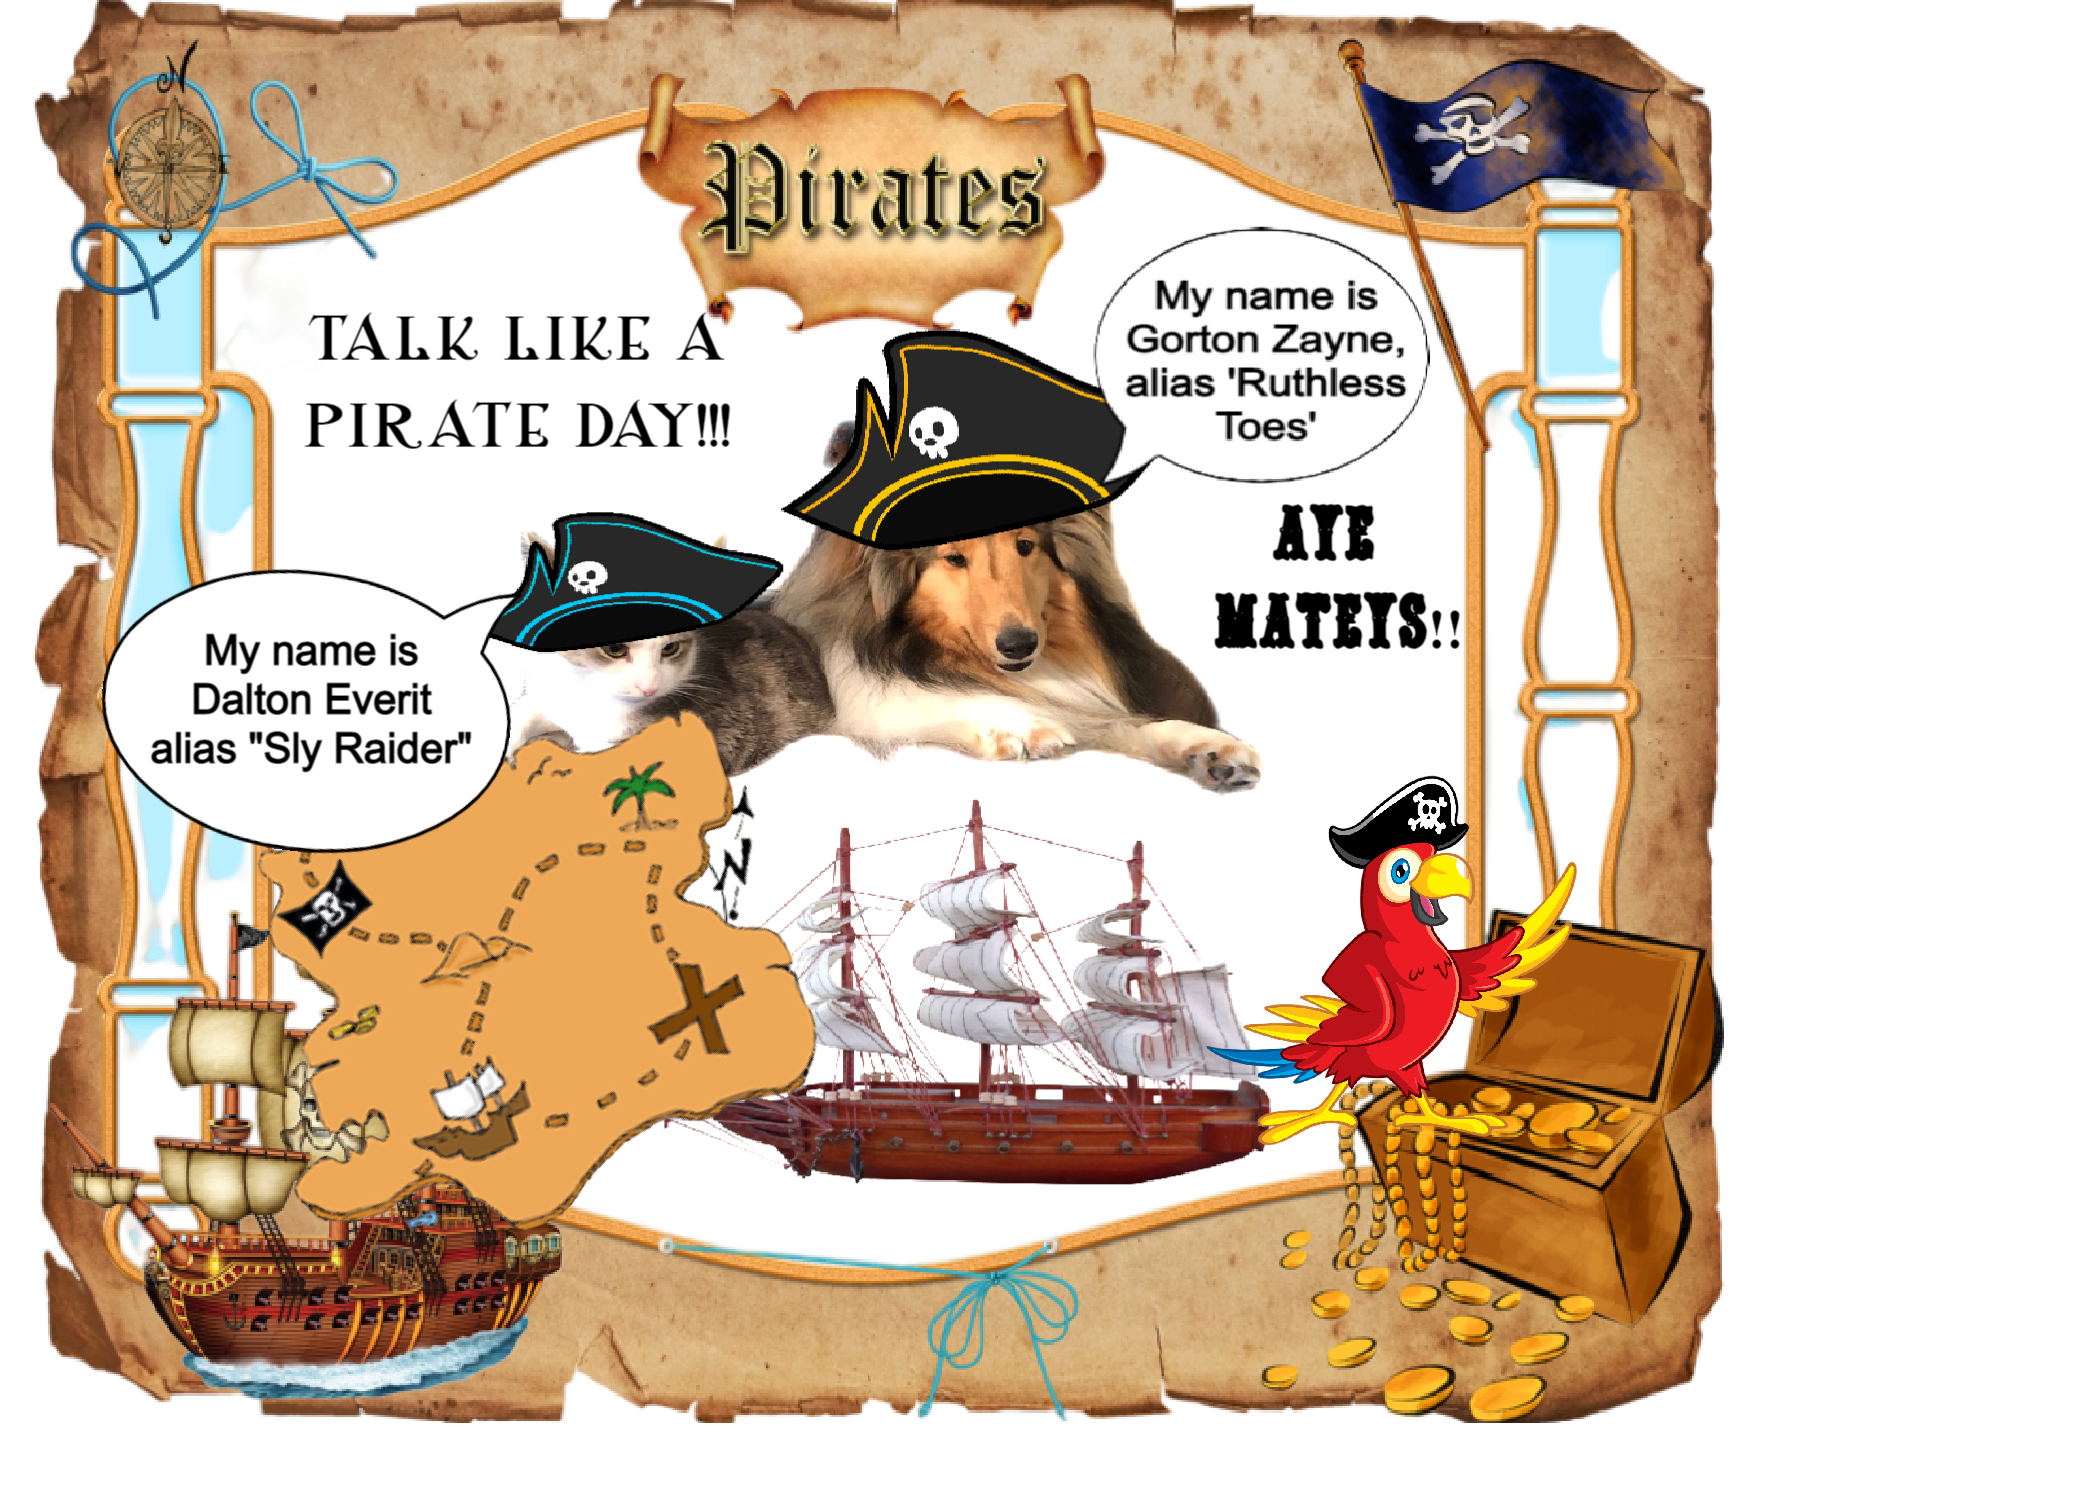 Ahoy! It's Talk Like a Pirate Day!